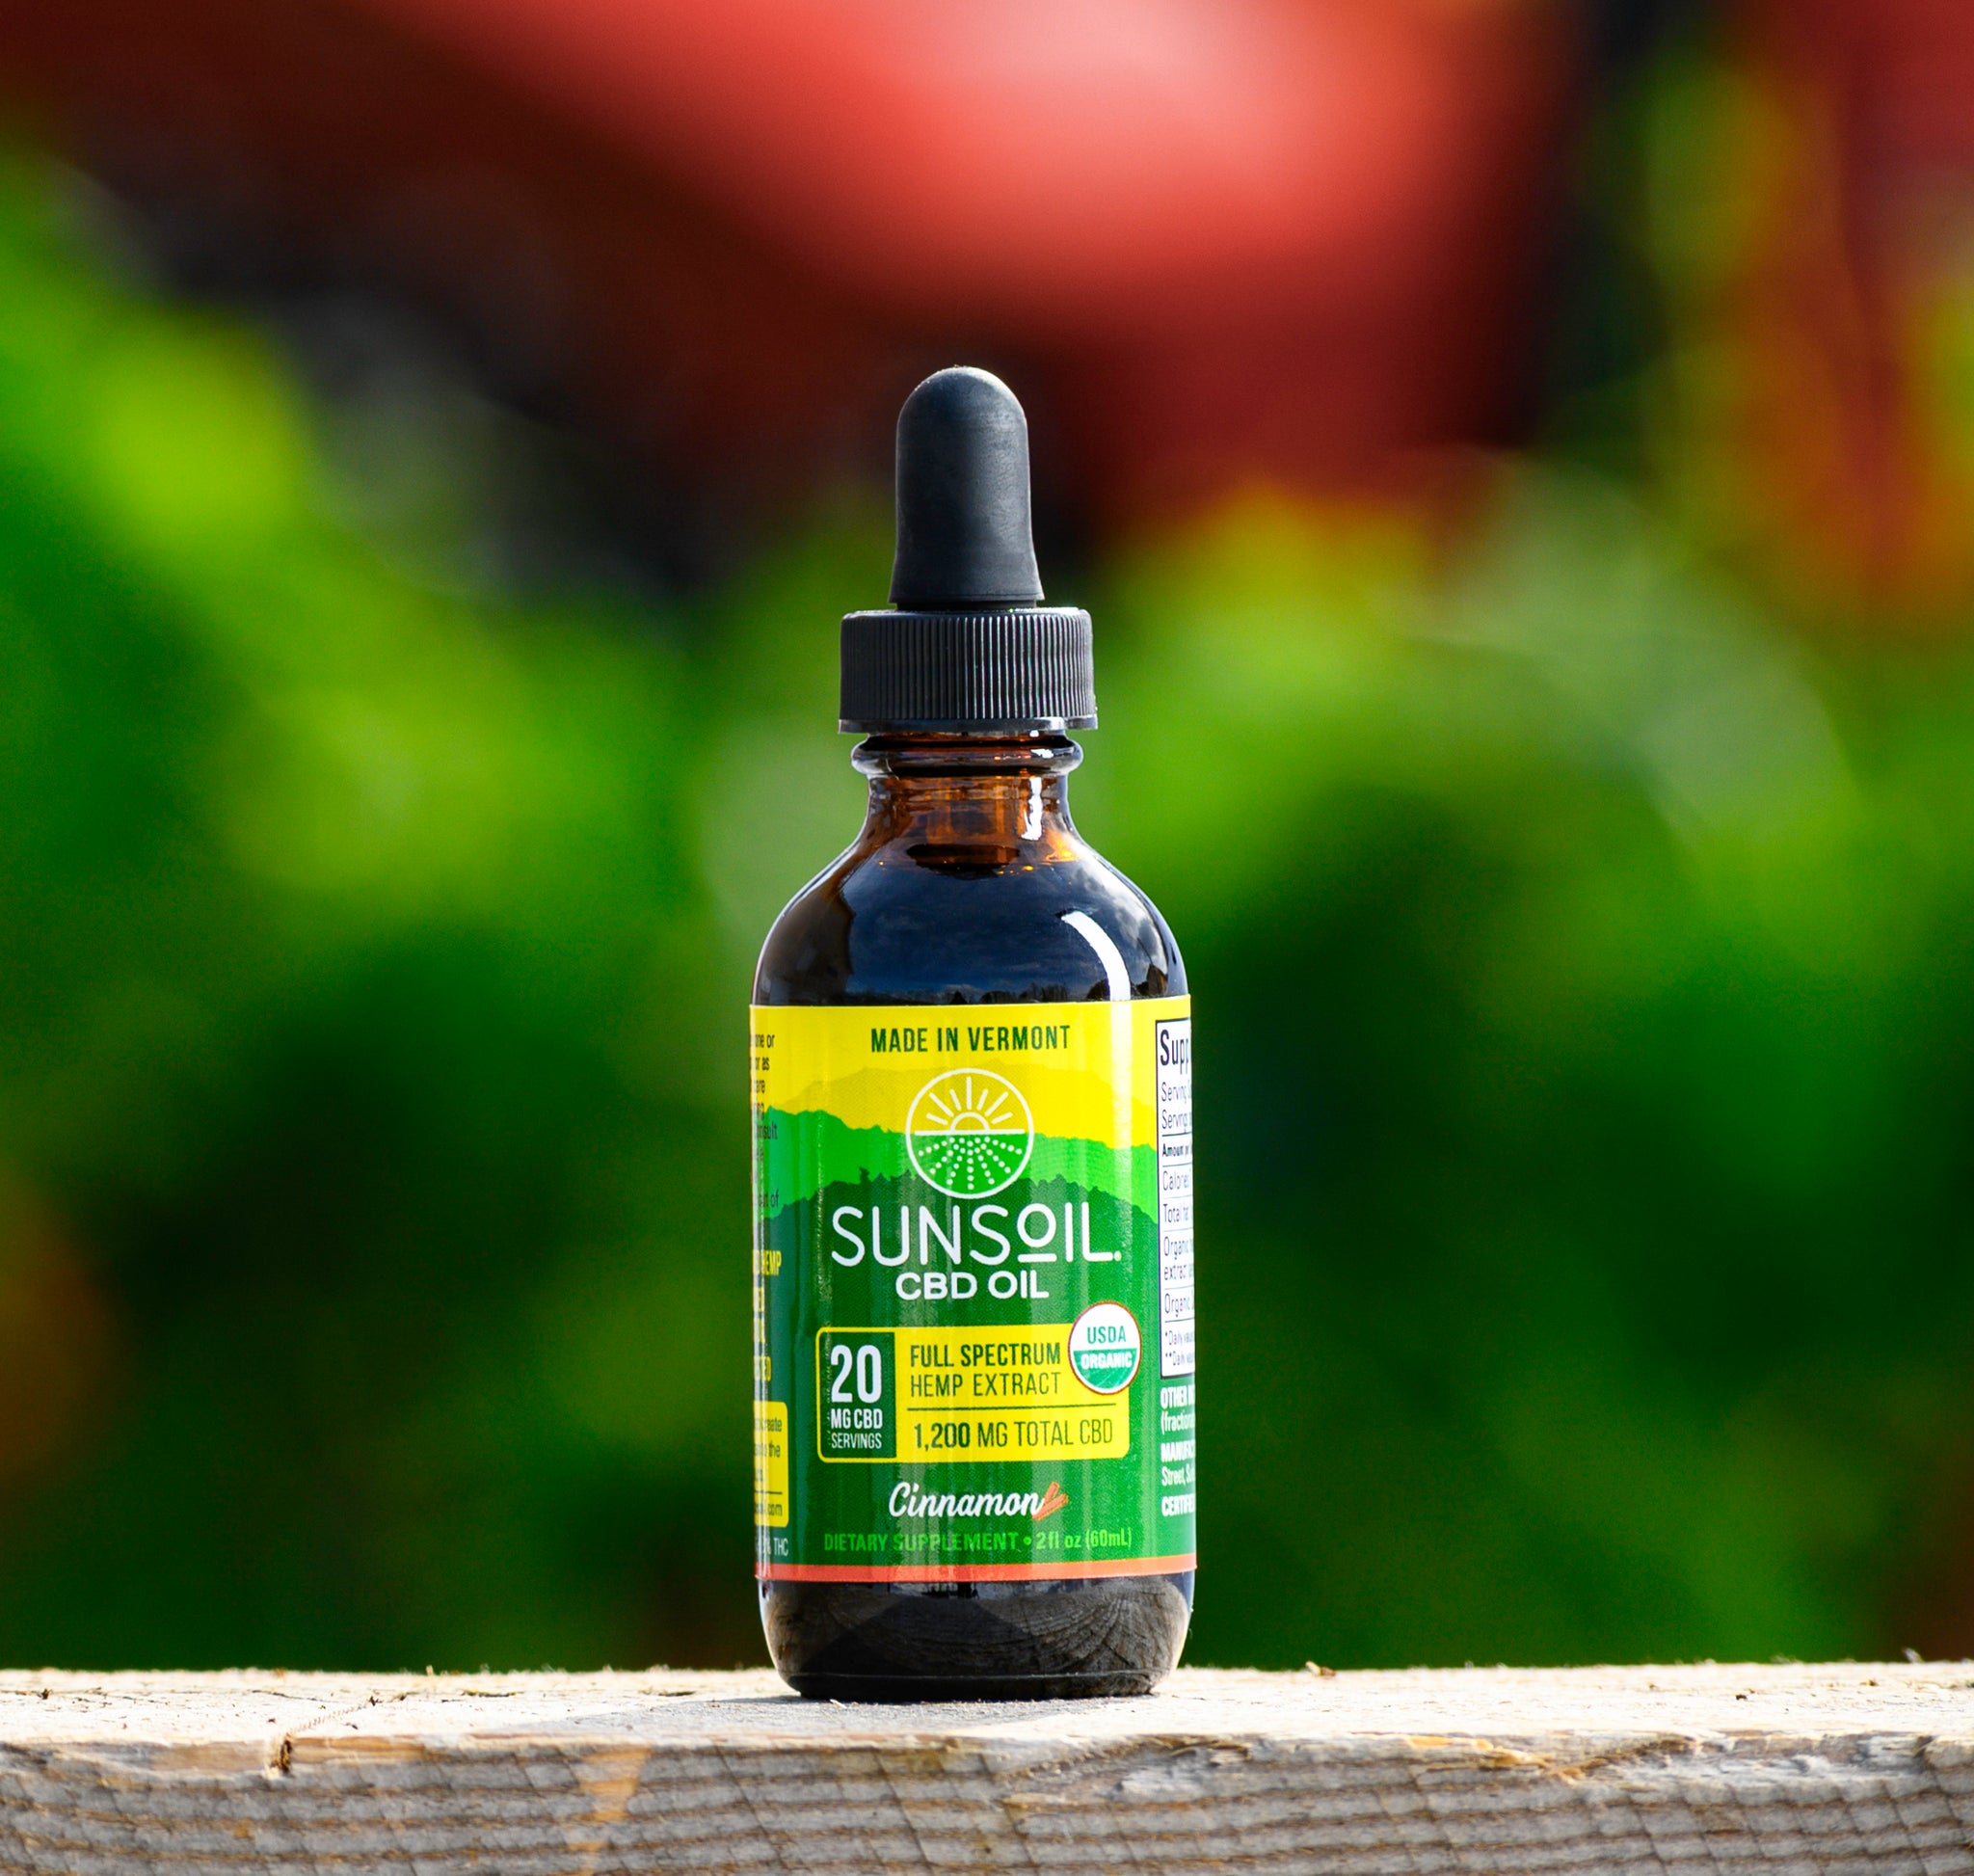 A dark glass bottle with Sunsoil's green and yellow label for the Cinnamon liquid CBD